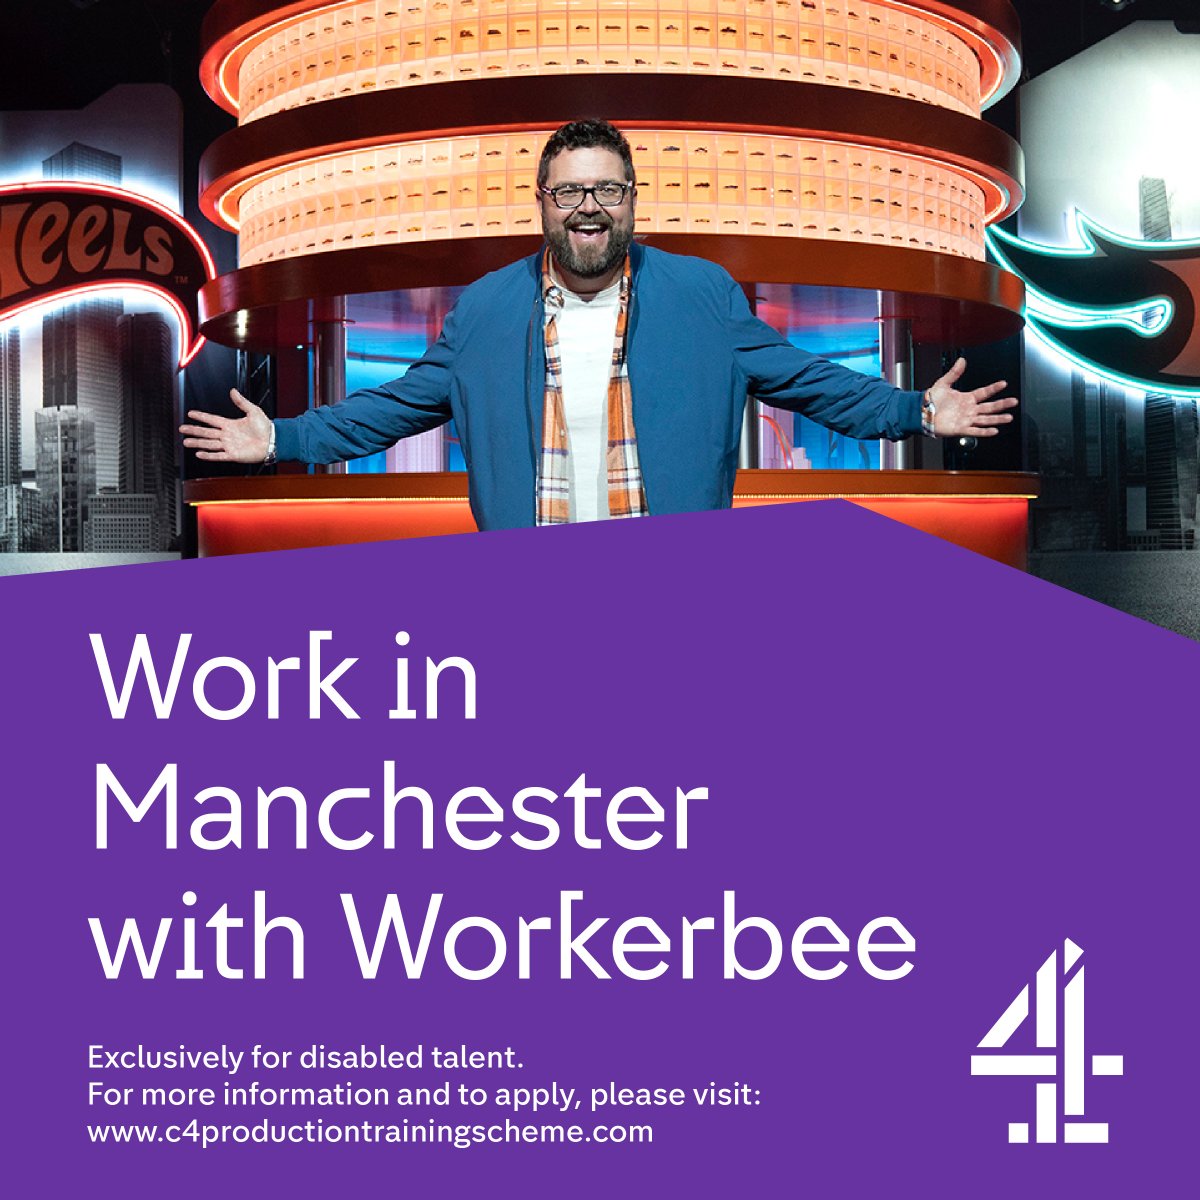 Want to work in Television Production? We've teamed up with Channel 4 and ThinkBIGGER's trainee scheme, aimed exclusively at disabled talent and we're looking for a Trainee Production Coordinator to join the Workerbee team! (Applications close 28th May!) c4productiontrainingscheme.com/Search/Job/147…